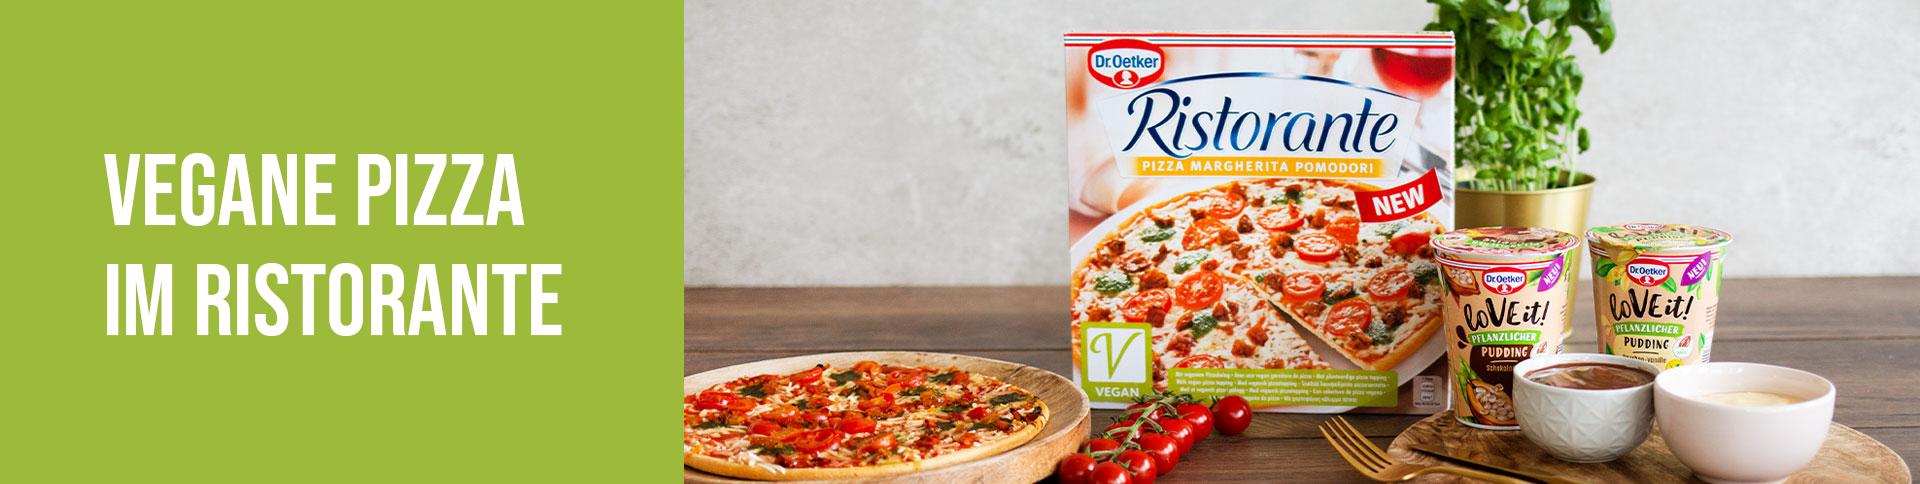 Dr. Oetker Ristorante Vegan & LoVE it! Pudding | oh! of the day